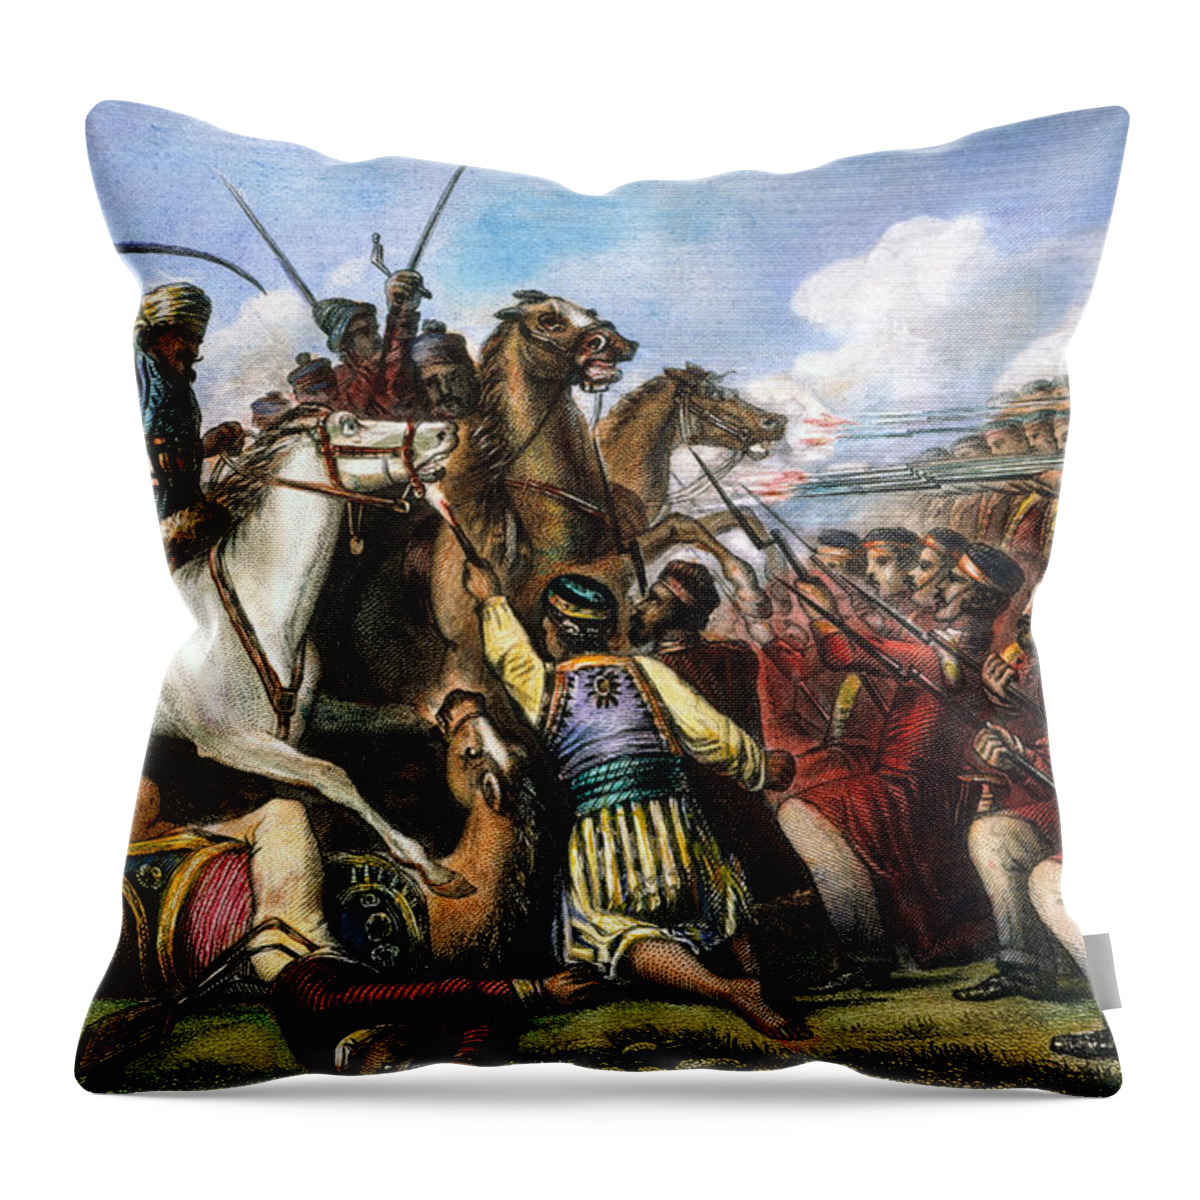 1857 Throw Pillow featuring the photograph India: Sepoy Mutiny, 1857 by Granger